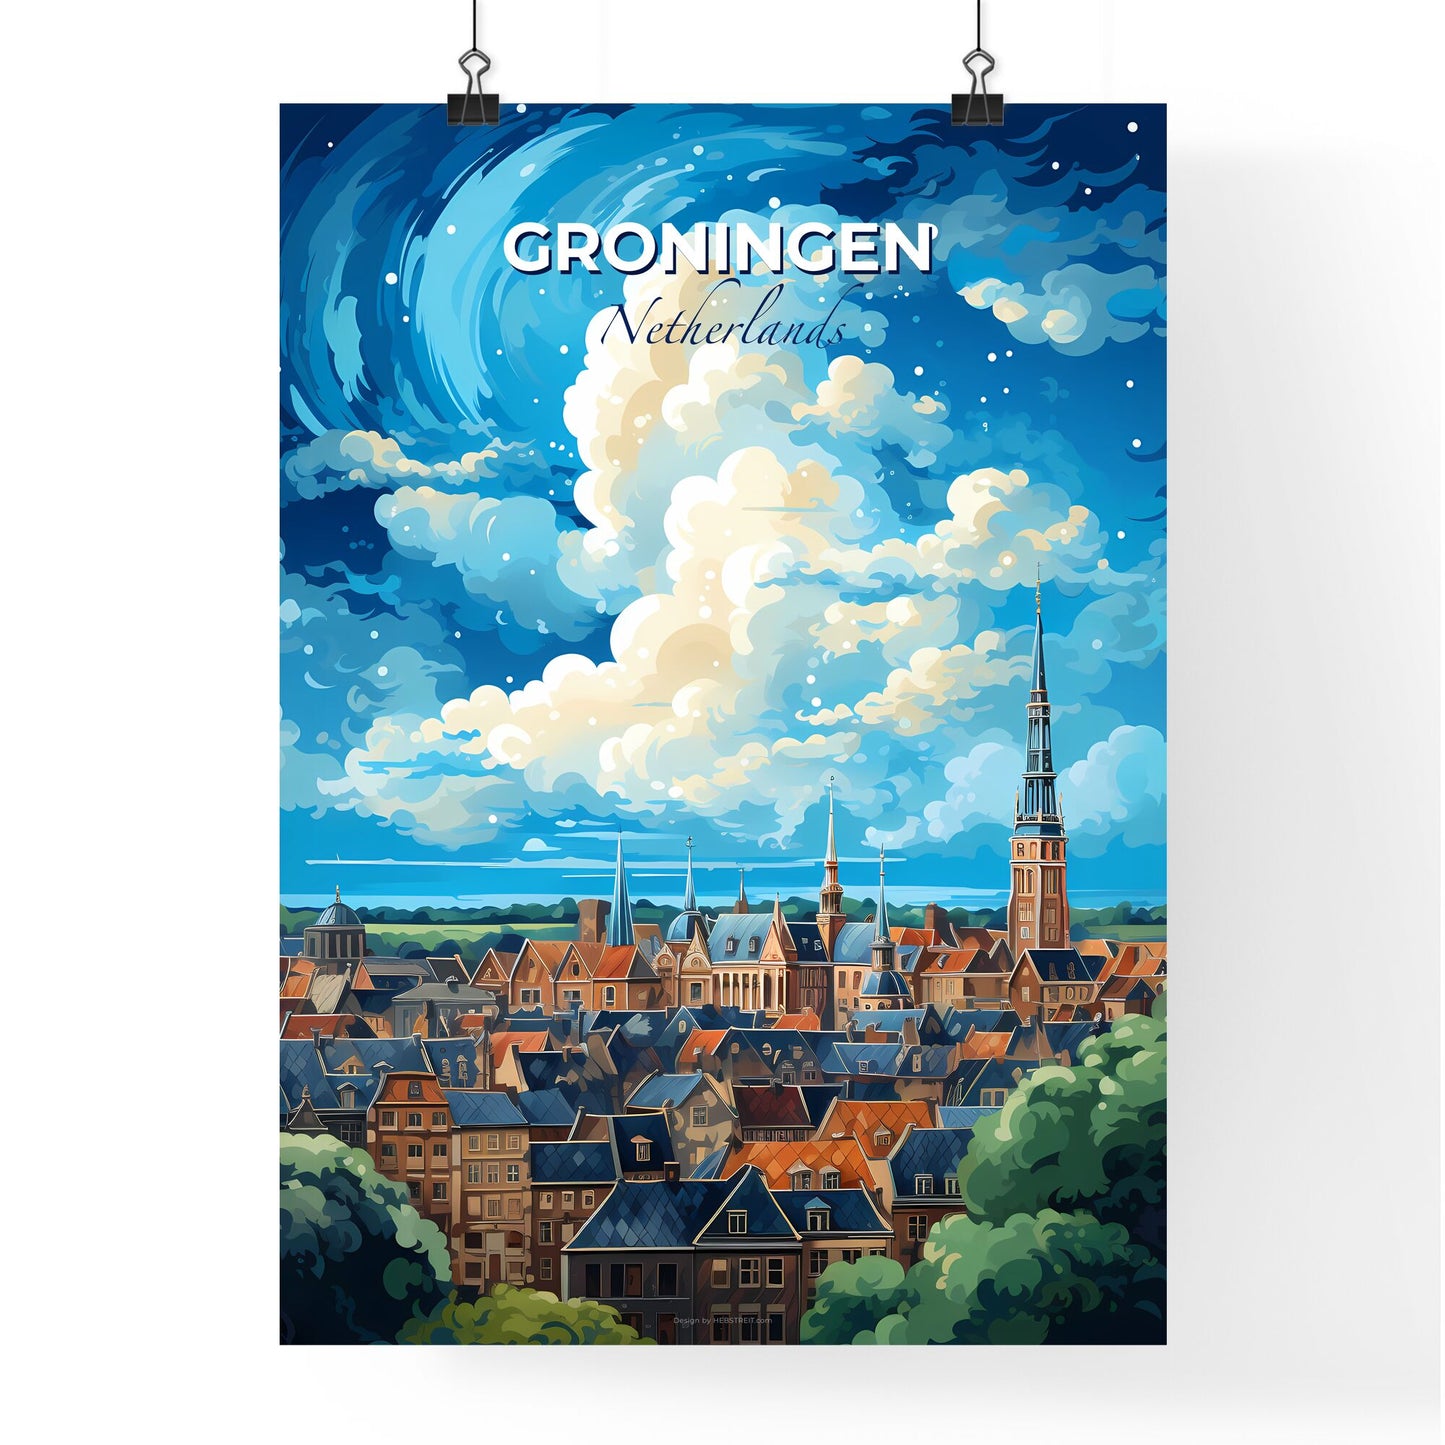 Groningen Netherlands Skyline - A City With A Tower And Trees - Customizable Travel Gift Default Title